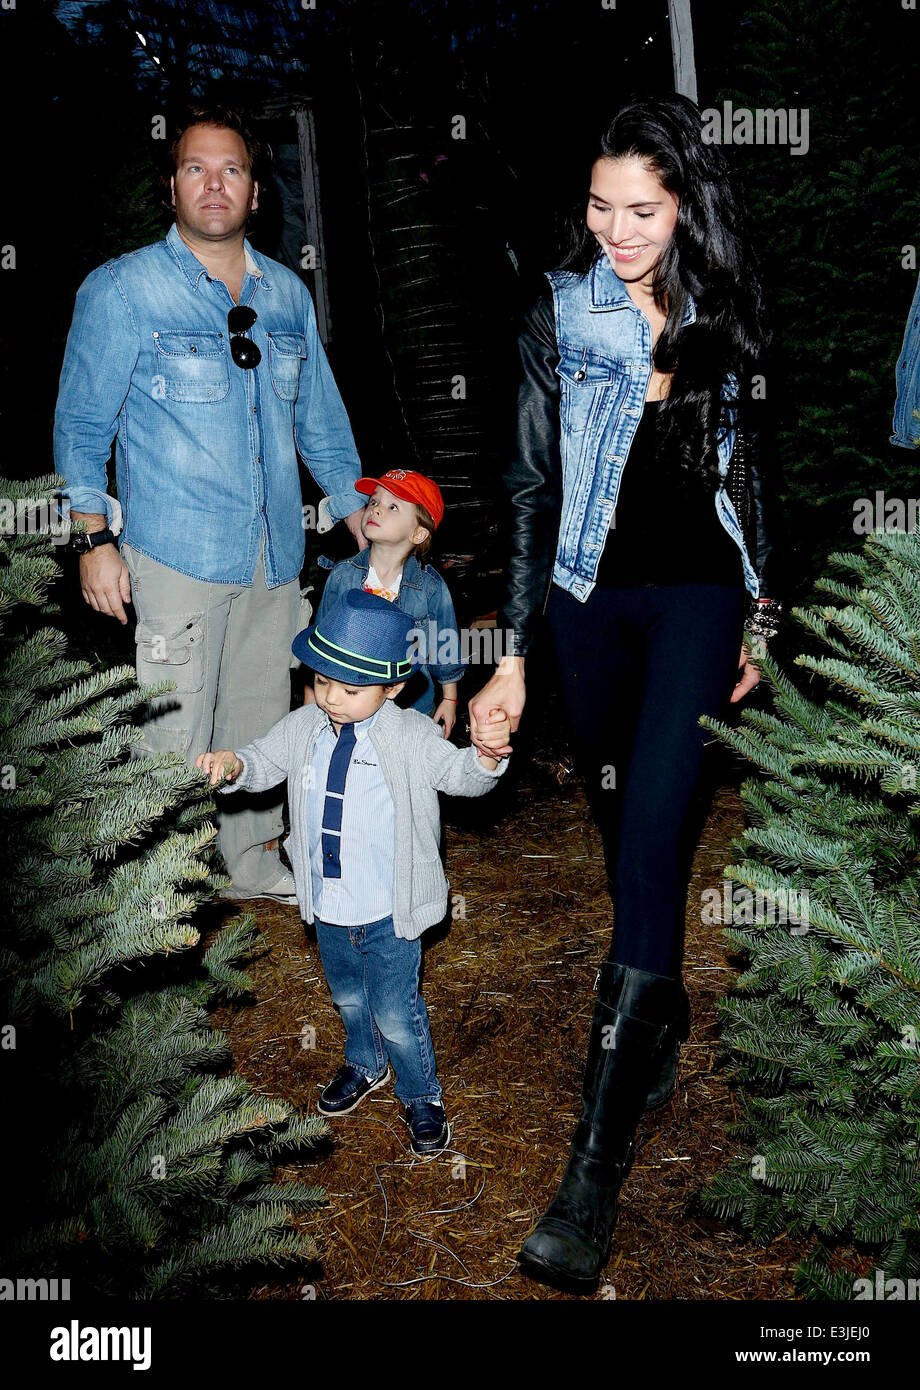 Joyce Giraud and her husband Michael Ohoven take their sons to an animal farm out christmas tree shopping in North Featuring: Joyce Giraud,Valentino Ohoven,Leonardo Ohoven,Michael Ohoven Where: North Hollywood, California,